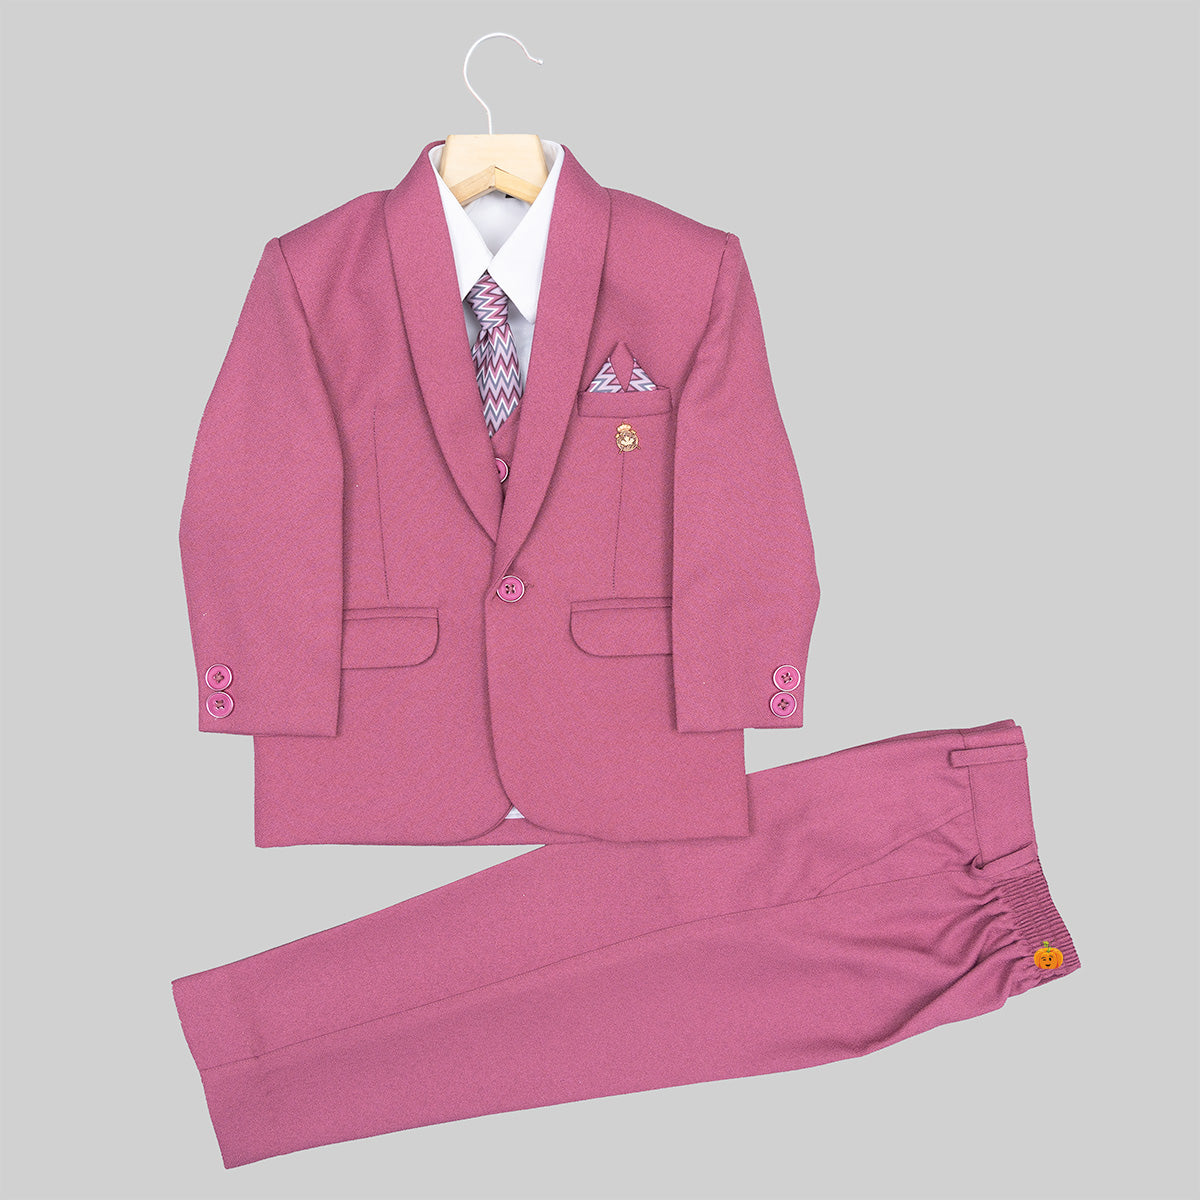 Boys Suits Jackets  Trousers  Next Official Site